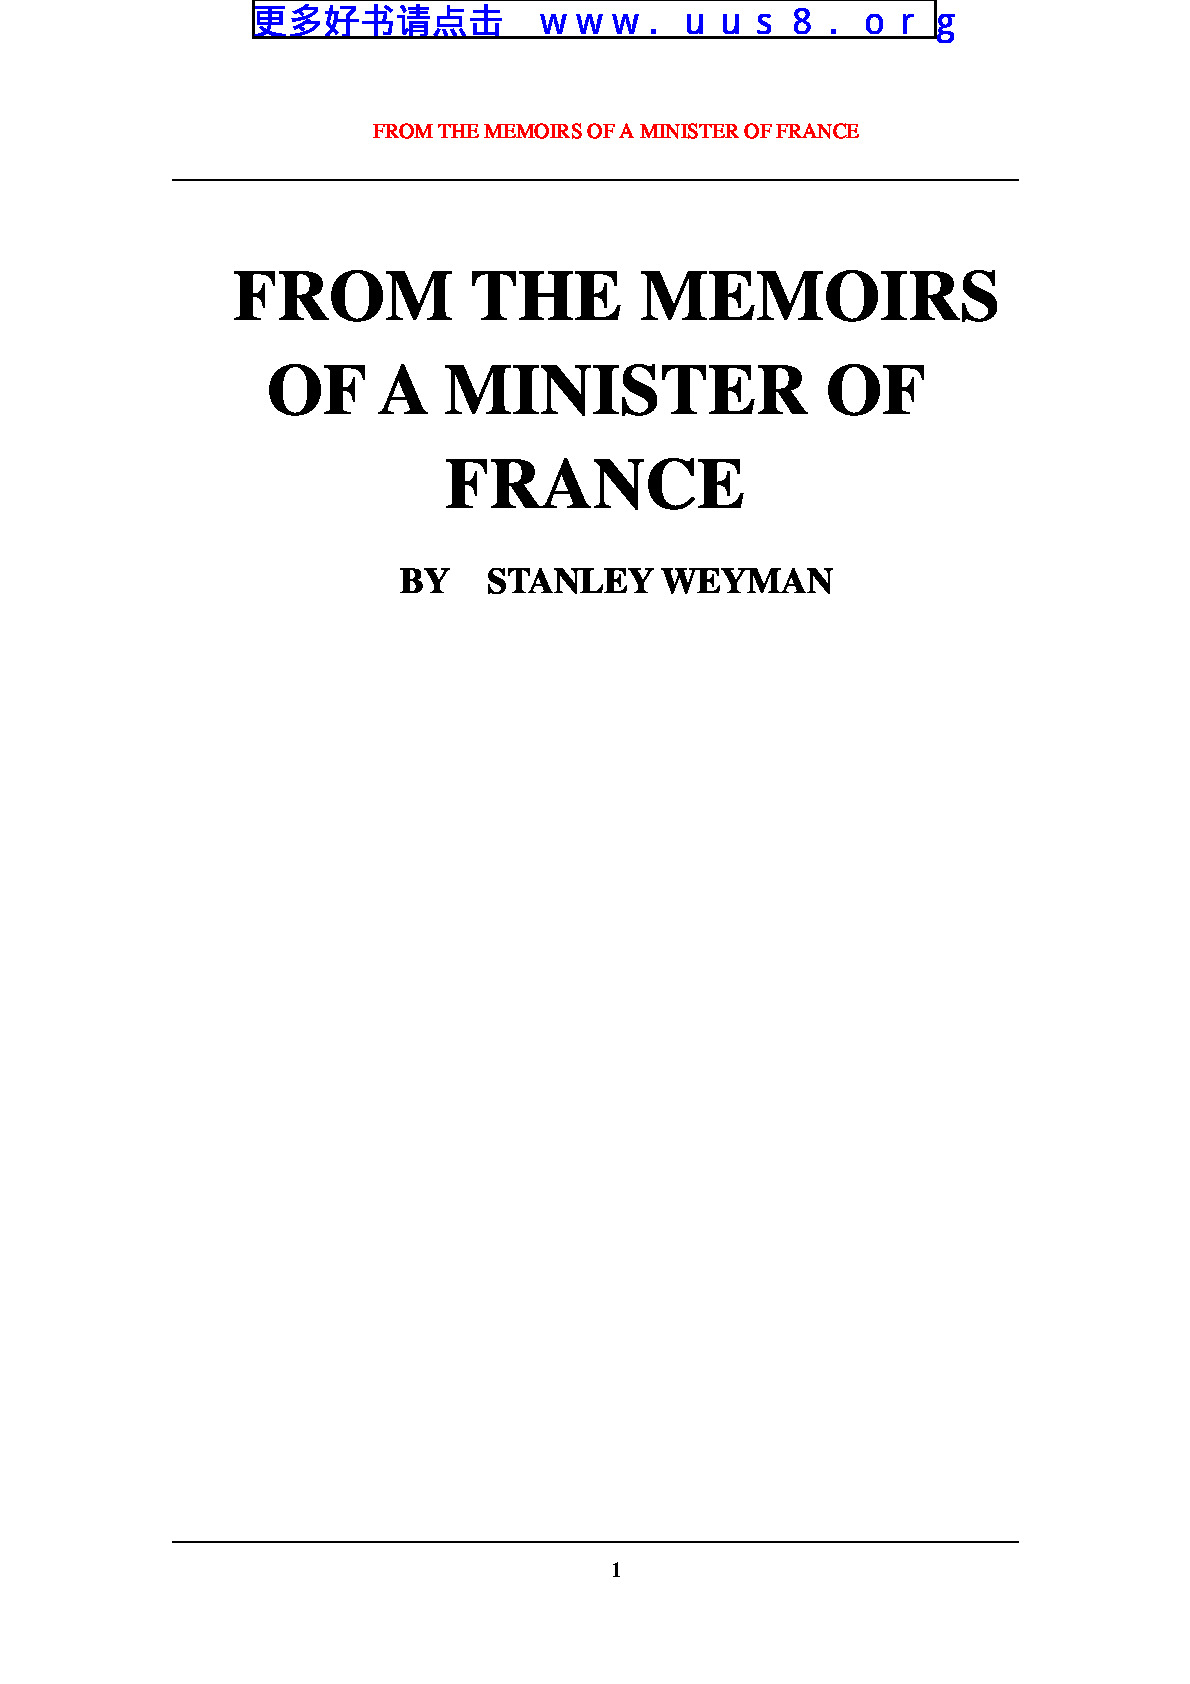 FROM_THE_MEMOIRS_OF_A_MINISTER_OF_FRANCE(法国某部长的回忆录)